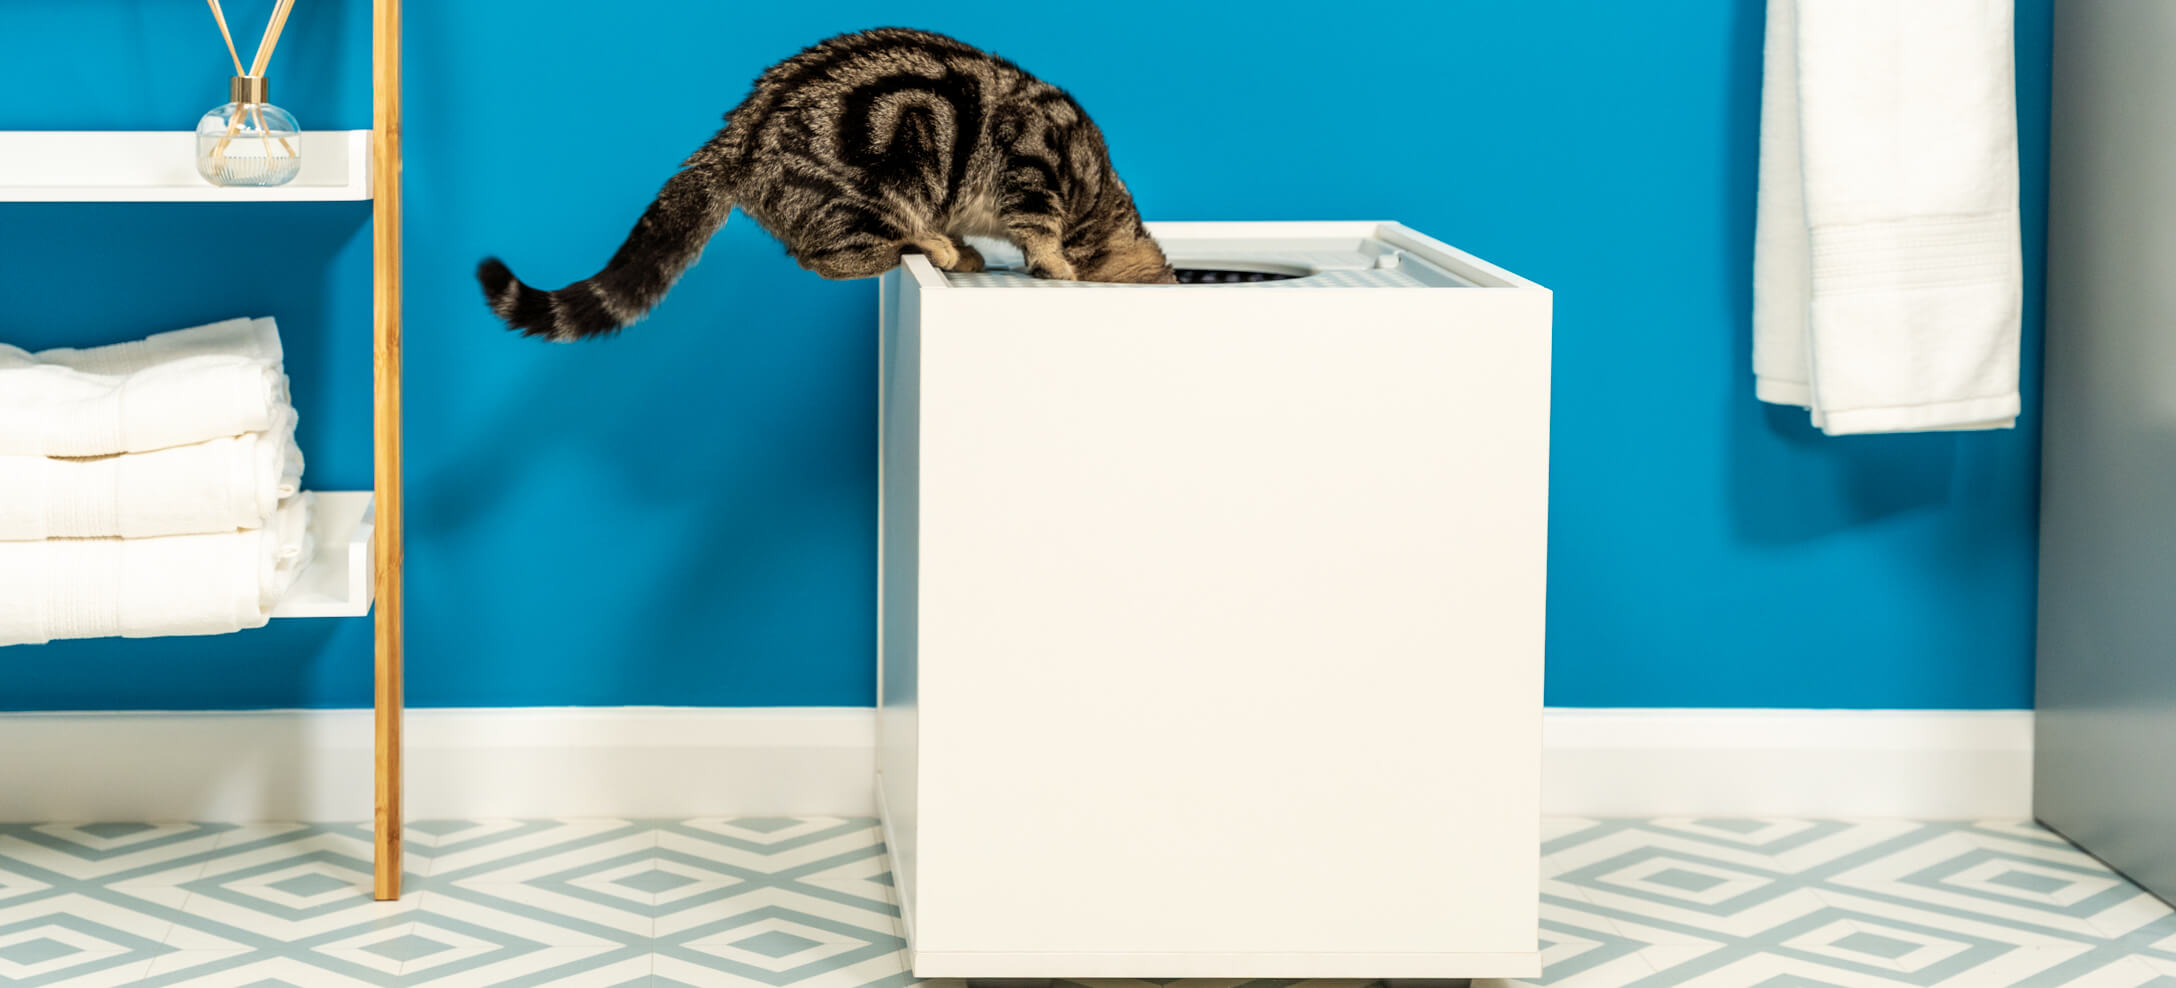 A tabby cat looking into a white litter box